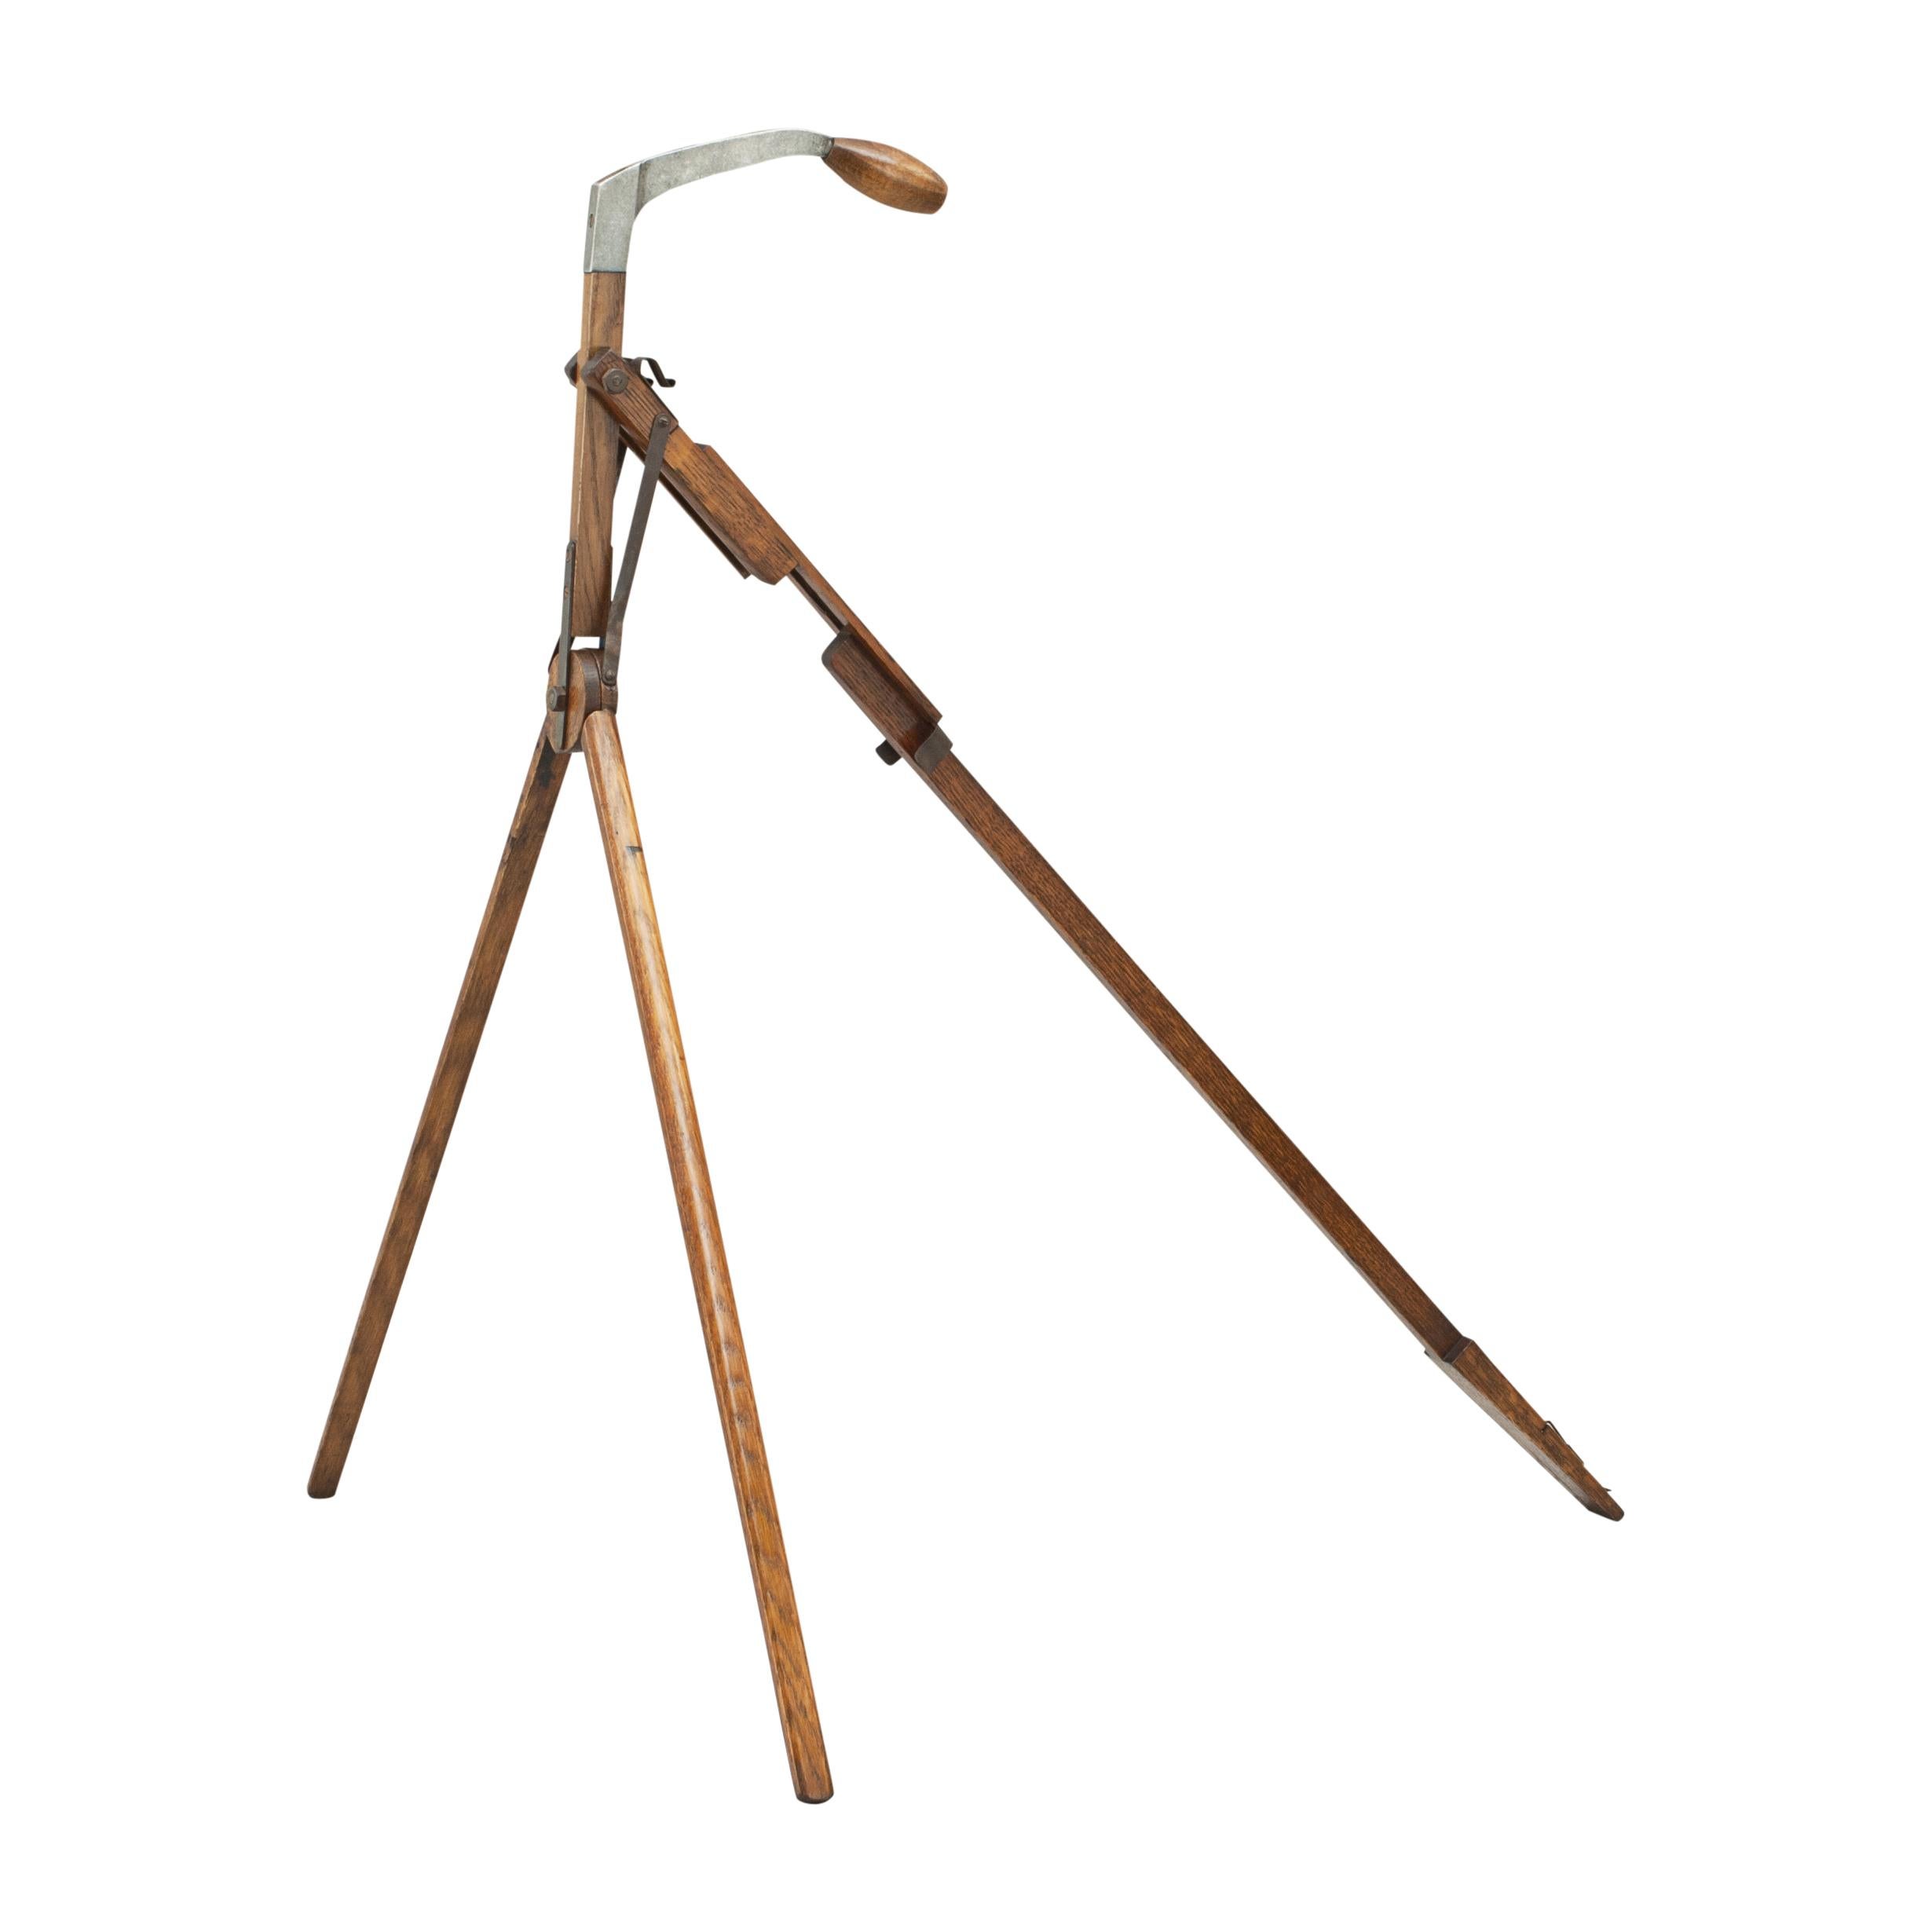 A unusual caddie stand for your pencil golf bag. Made by the English firm, F.H. Ayres, the stand clips onto your golf bag, thus turning it into a caddie bag. With the push of a handle the two oak scissor legs come out to support the bag. The